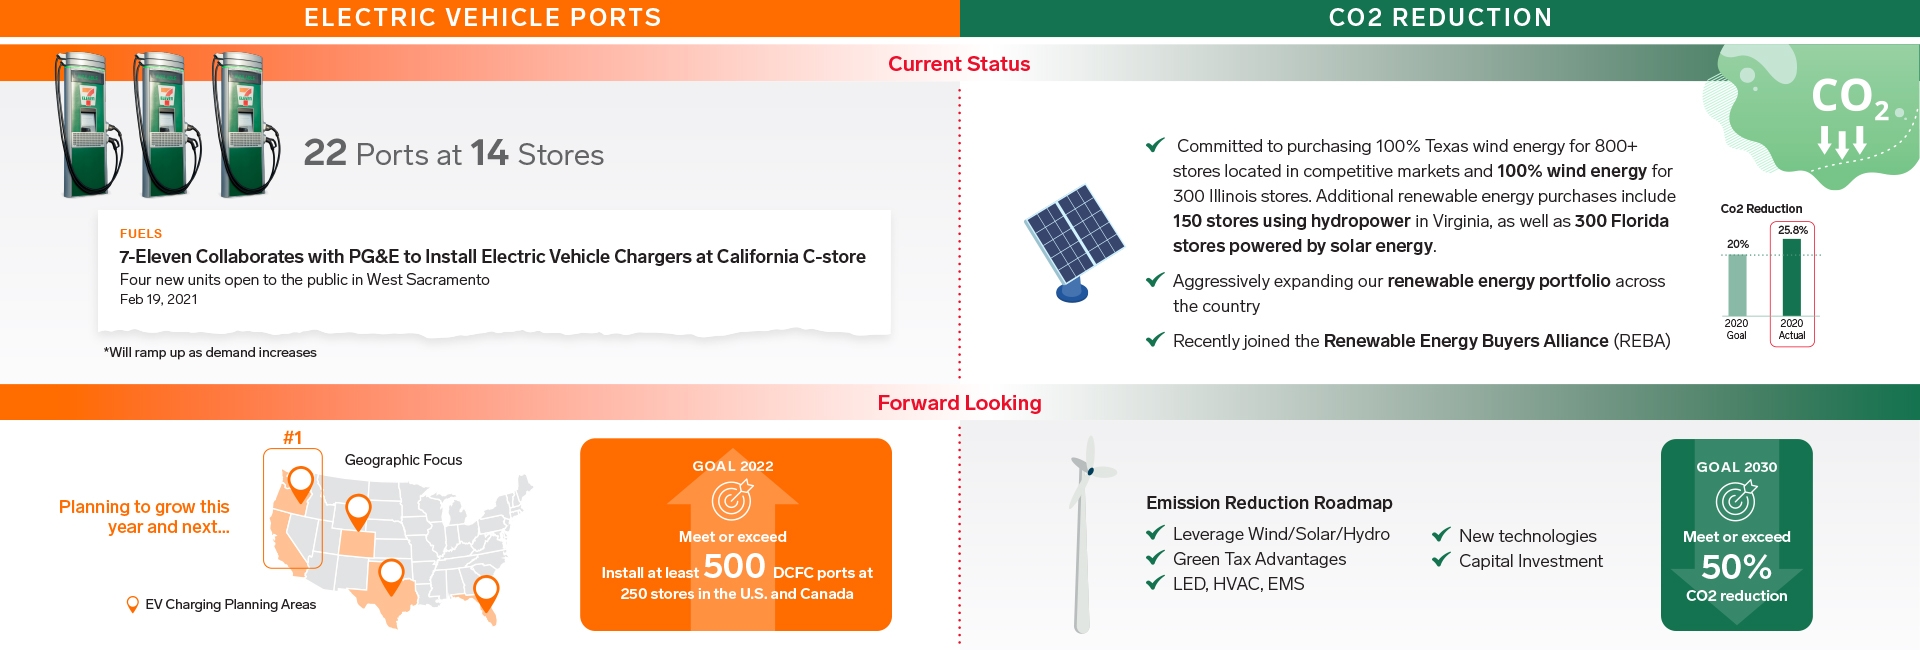 Infographic about electric vehicle ports and CO2 reduction currently and forward looking